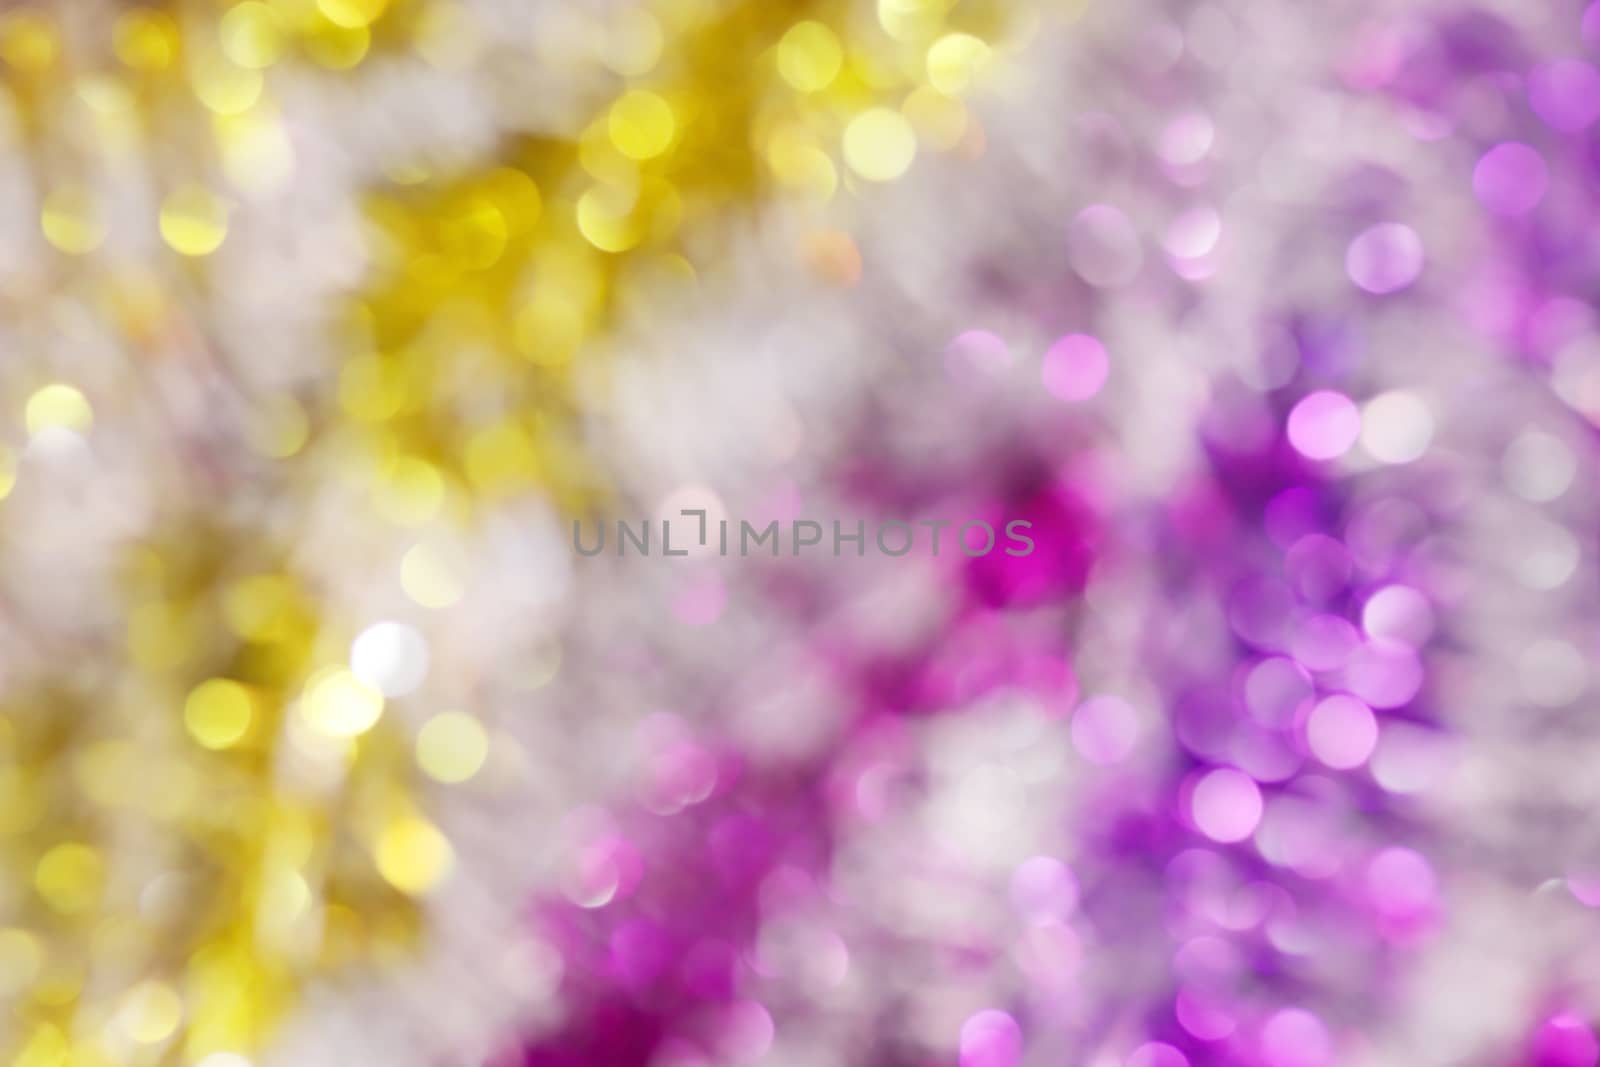 blurred picture yellow gold and purple bokeh colorful glittering for merry christmas and happy new year festival background design by cgdeaw